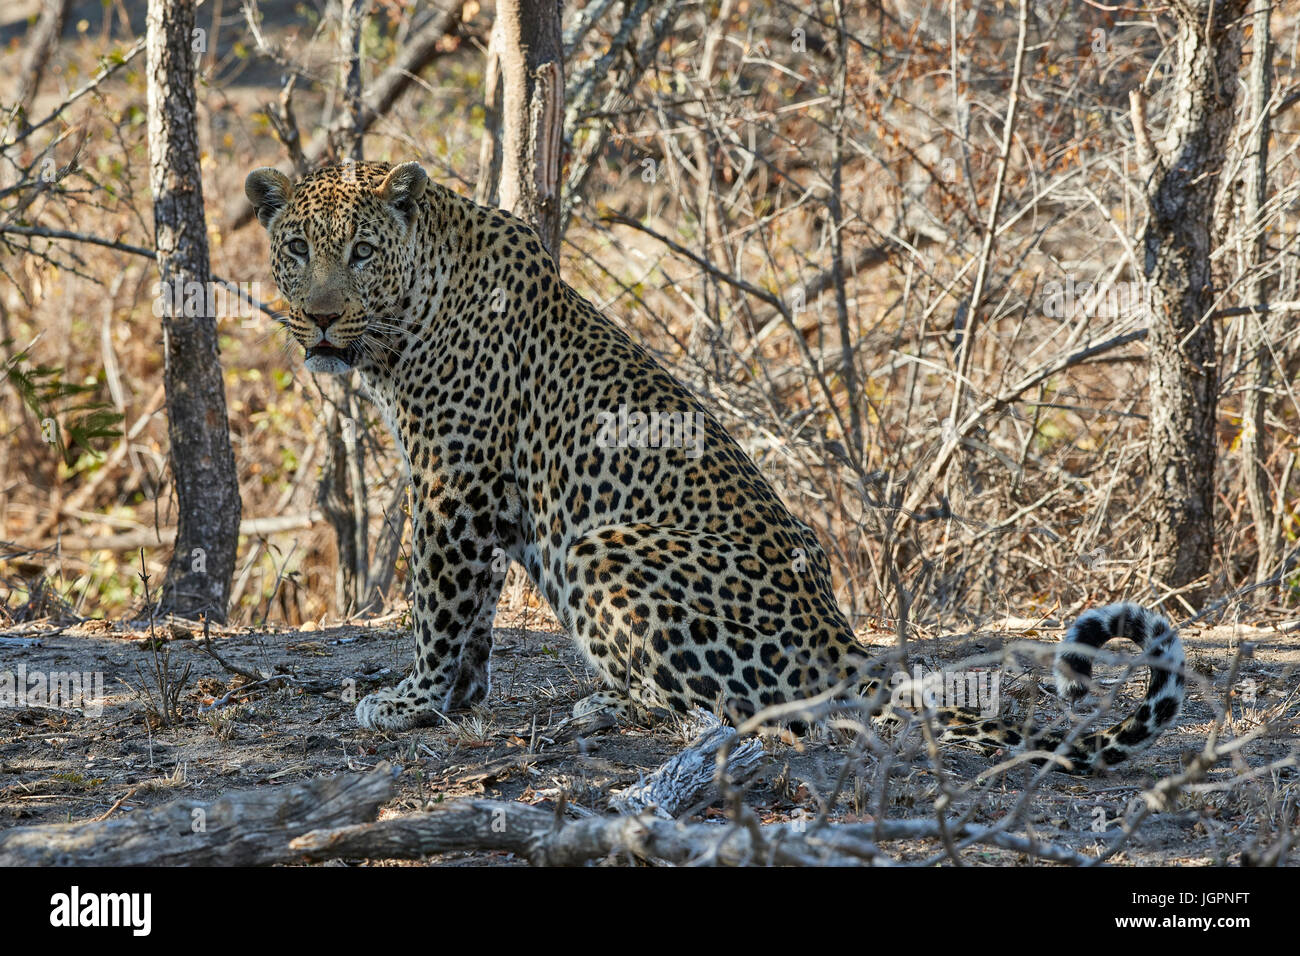 Leopard, Panthera pardus, Sabi Sands nature reserve, South Africa, large male sitting on the ground Stock Photo